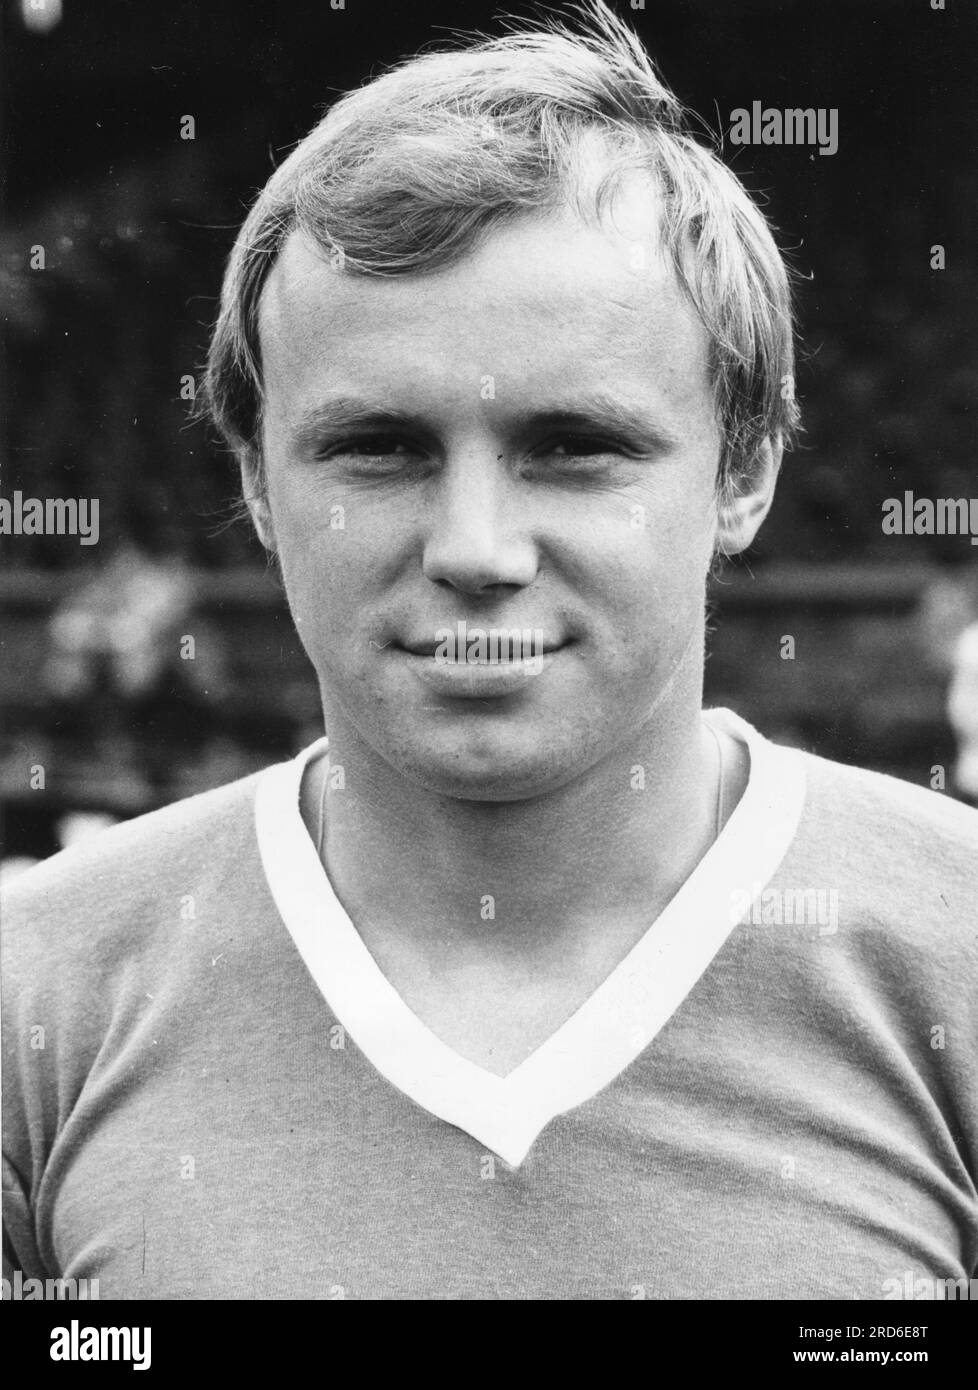 Wittkamp, Hans-Juergen, * 23.7.1947, German football player, midfielder for FC Schalke 04 1967 - 1971, ADDITIONAL-RIGHTS-CLEARANCE-INFO-NOT-AVAILABLE Stock Photo